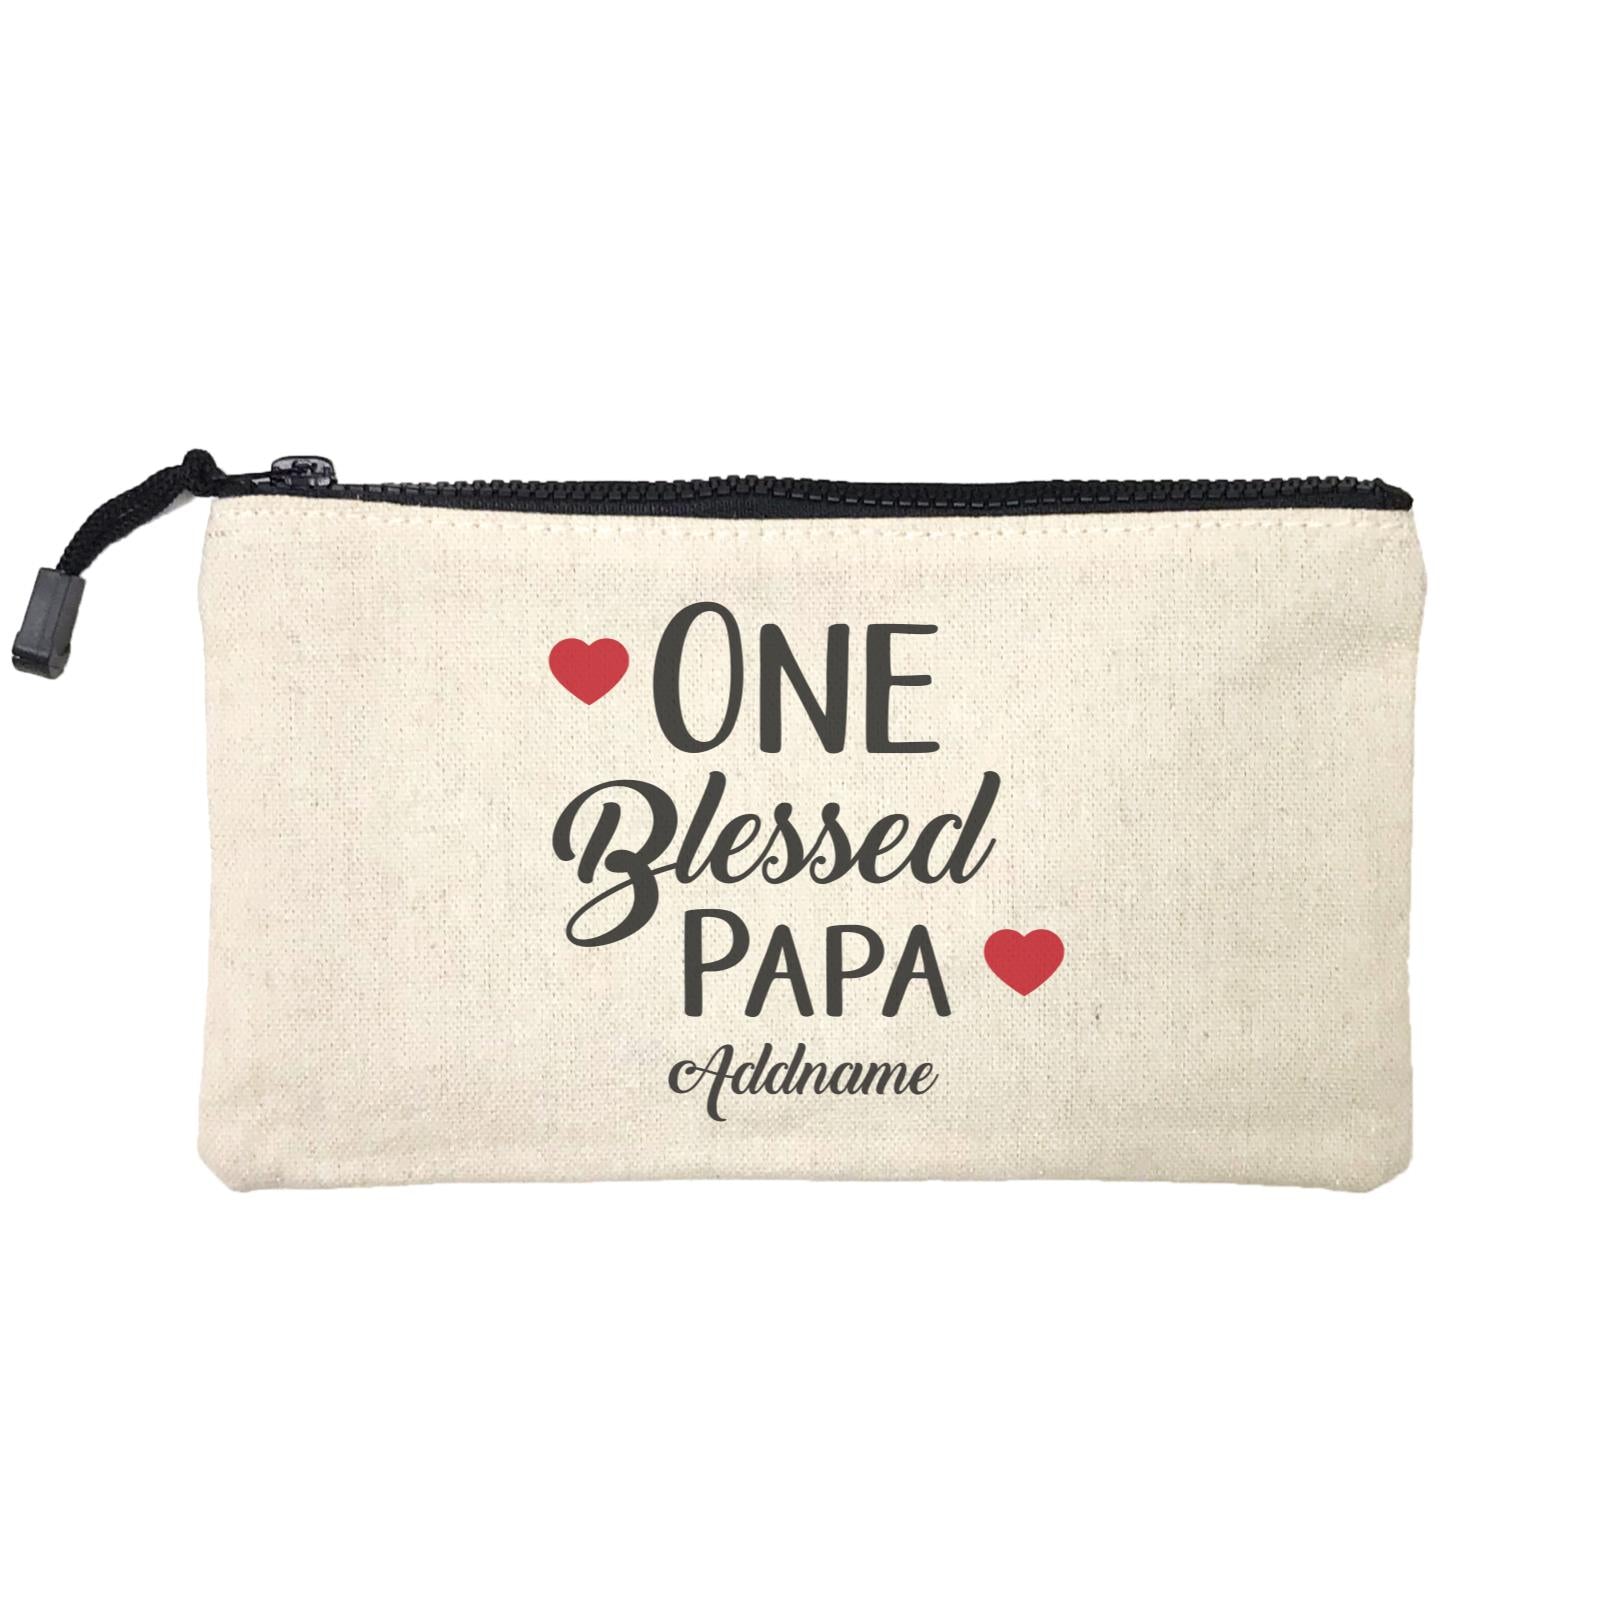 Christian Series One Blessed Papa Addname Mini Accessories Stationery Pouch